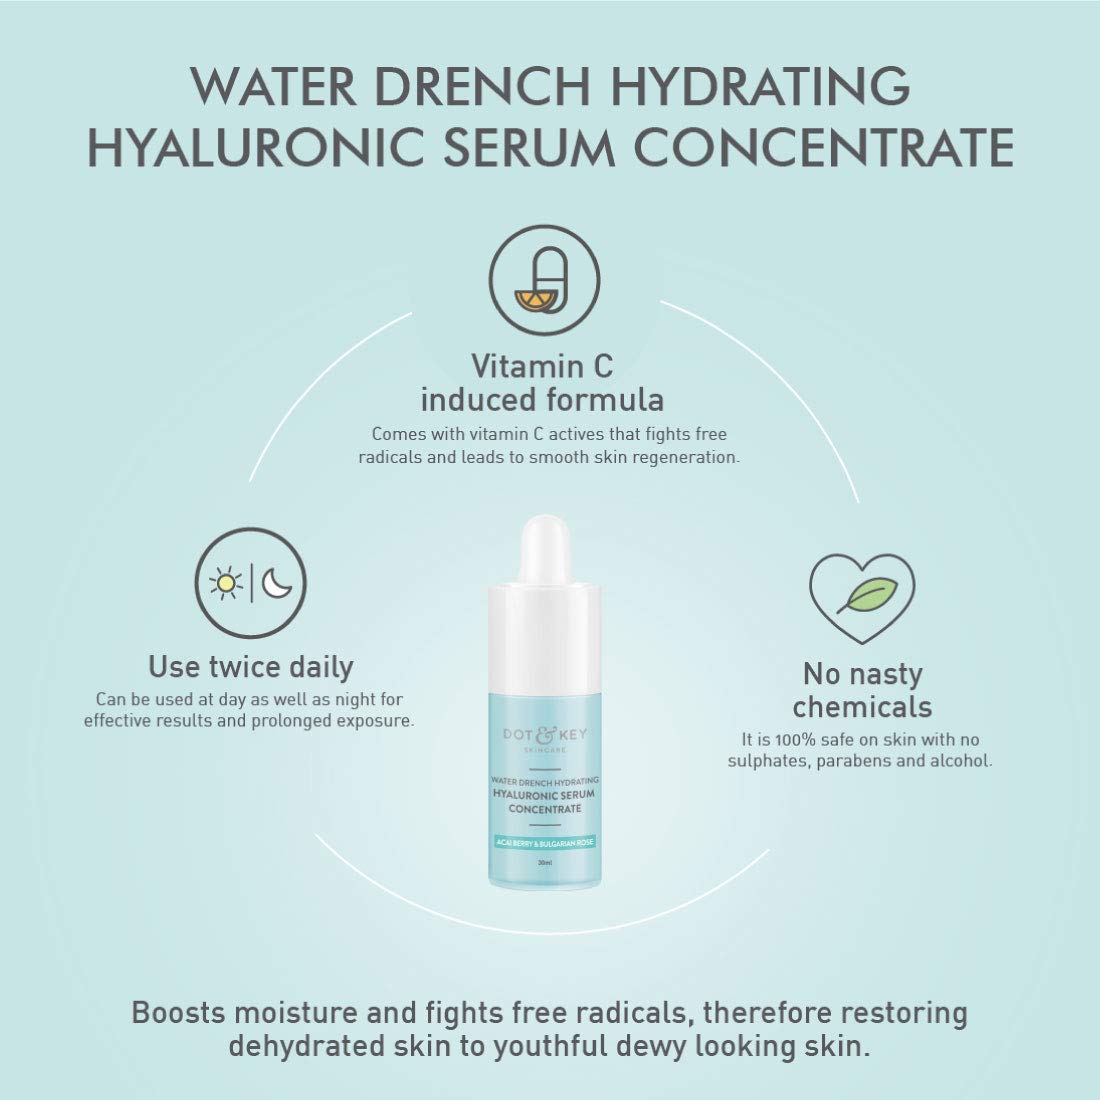 Hydrating Hyaluronic Acid Serum for Face & skin, with Vitamin C, E and B5 for Intense Hydration + Moisture, Paraben Free, 1 fl oz.